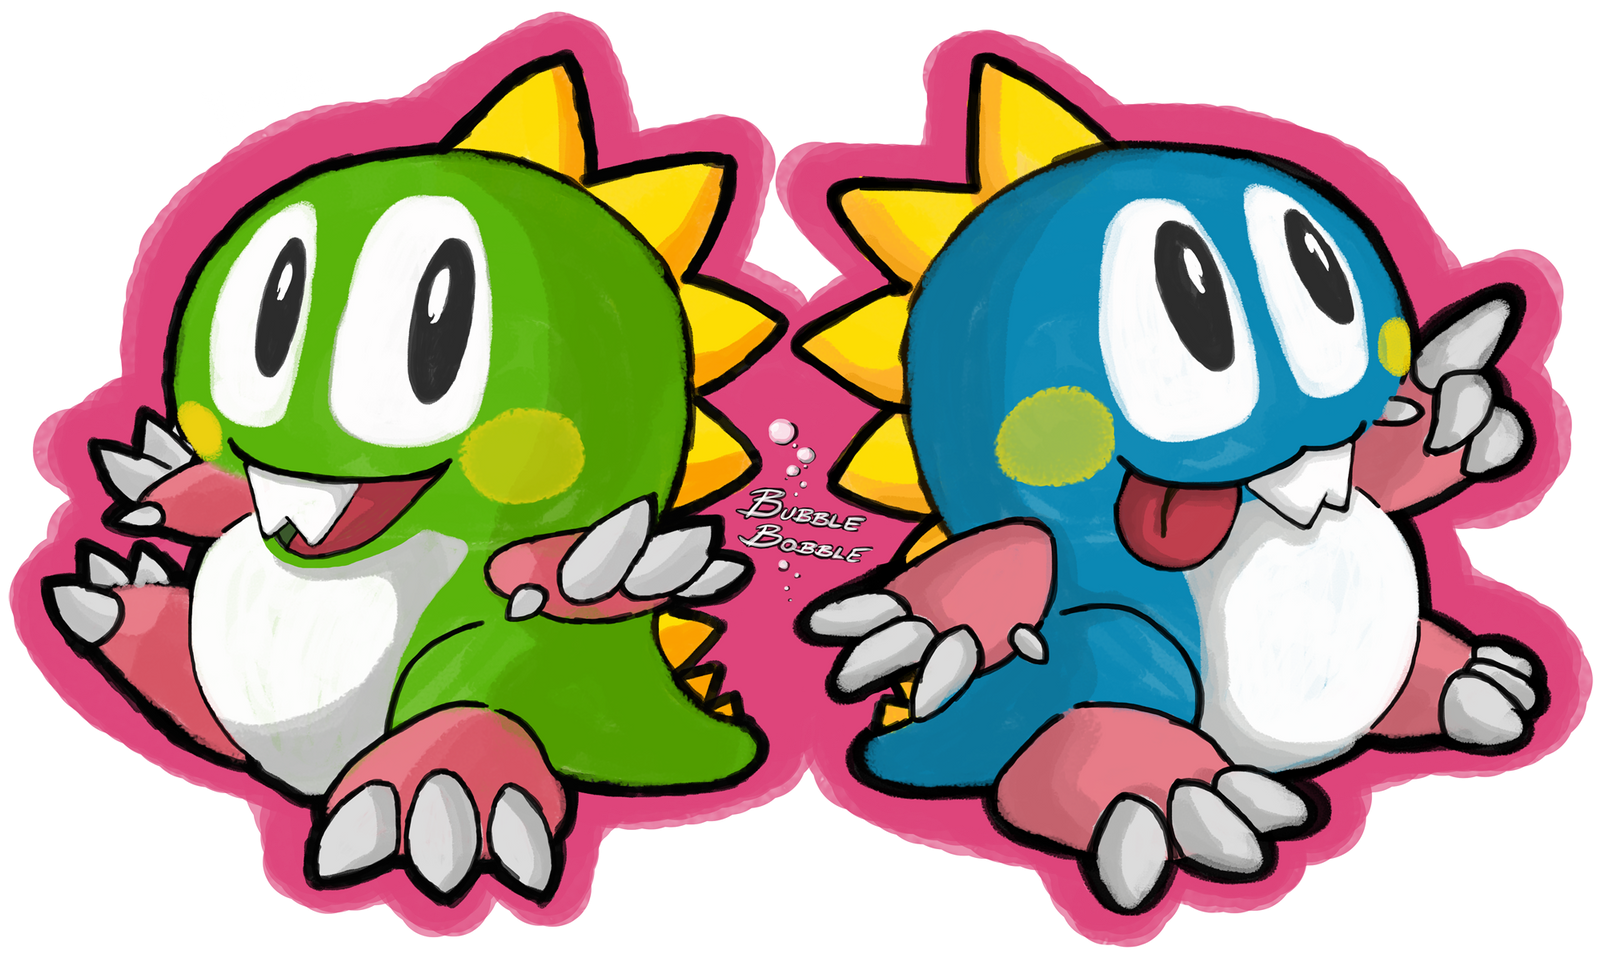 bubble_bobble_brothers_by_kanogetz-d5w3219.png